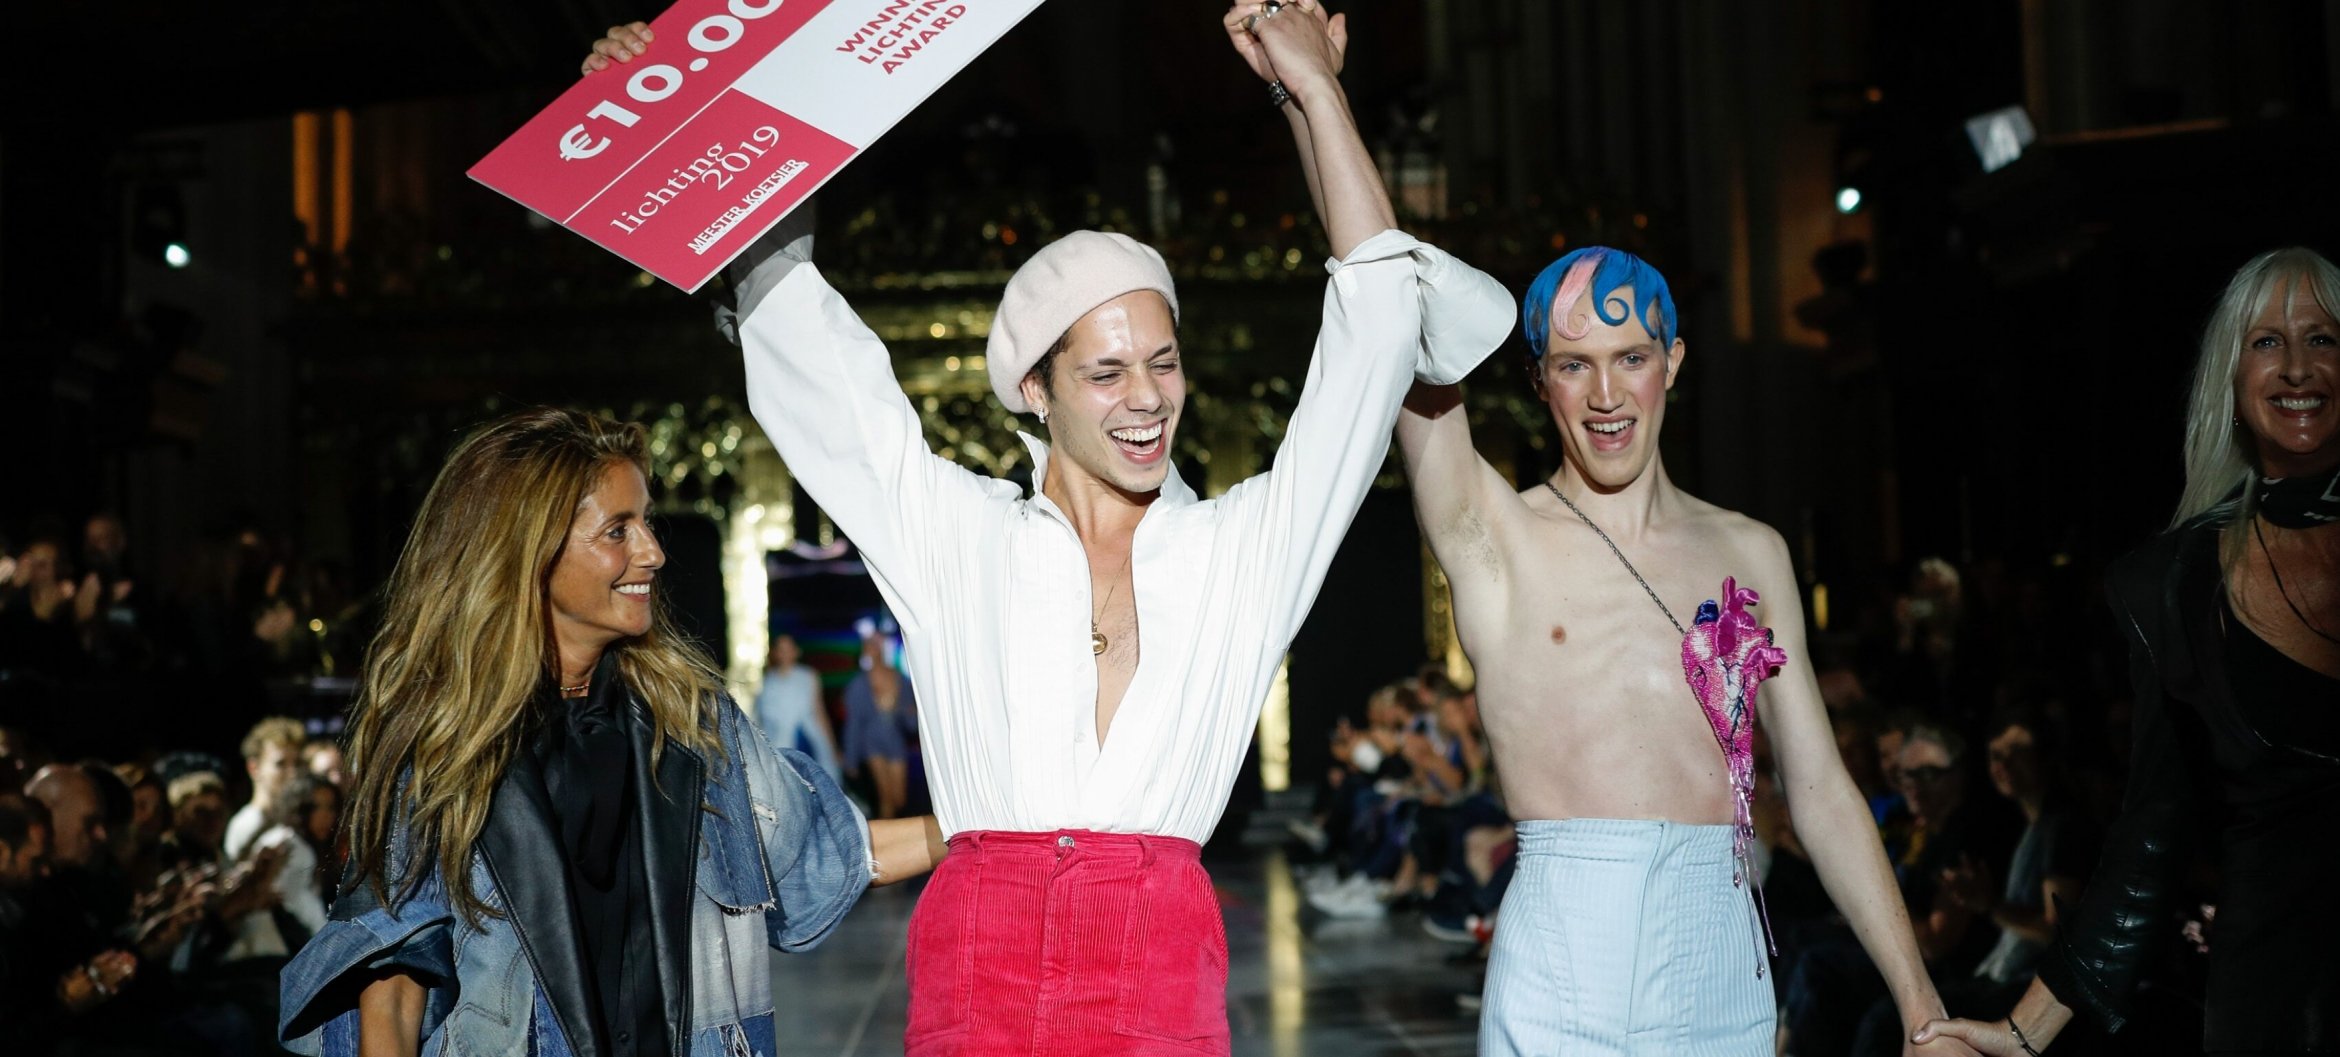 Dylan Westerweel wint Lichting 2019 Amsterdam Fashion Week | Foto: Peter Stigter